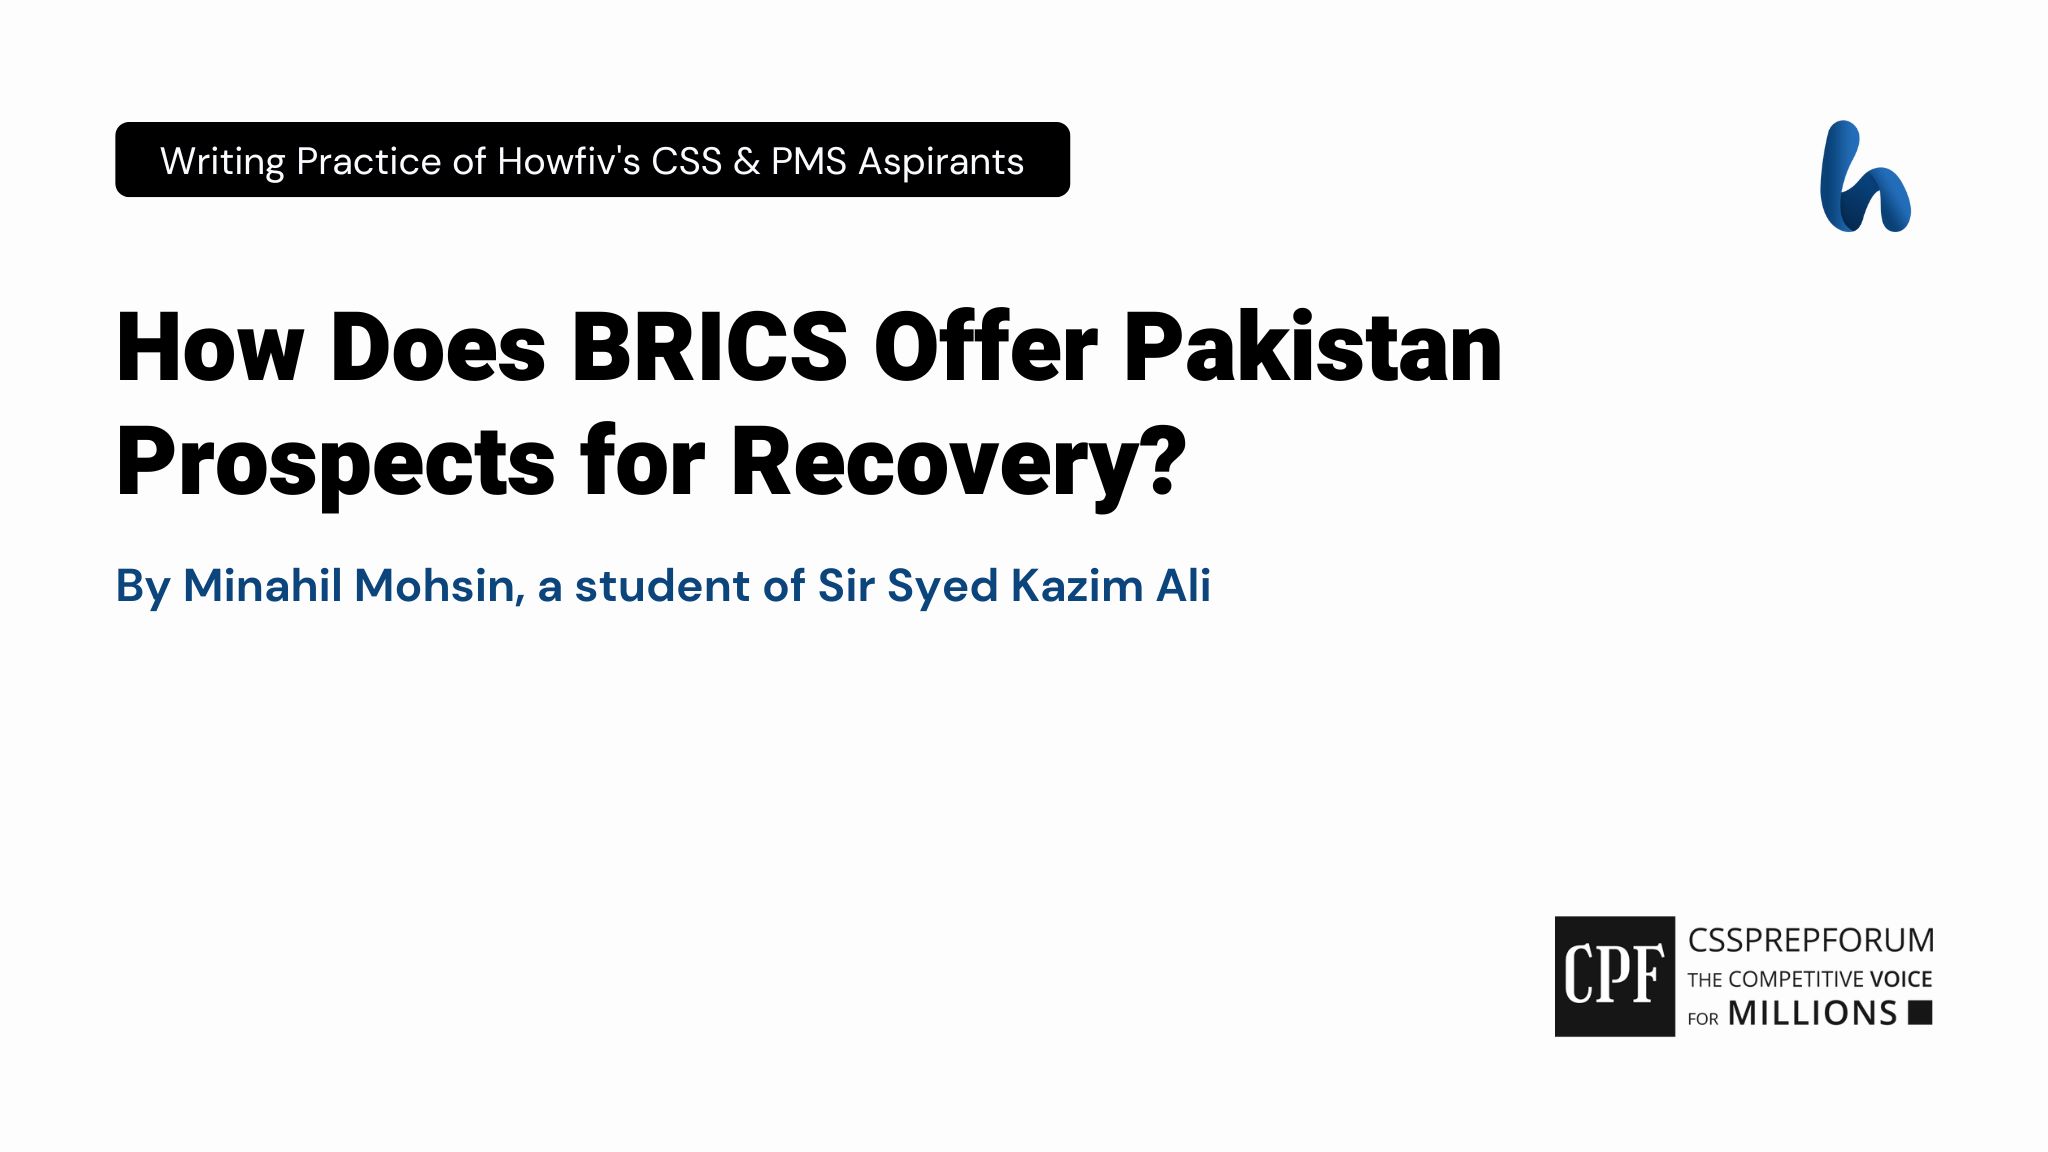 How Does BRICS Offer Pakistan Prospects for Recovery